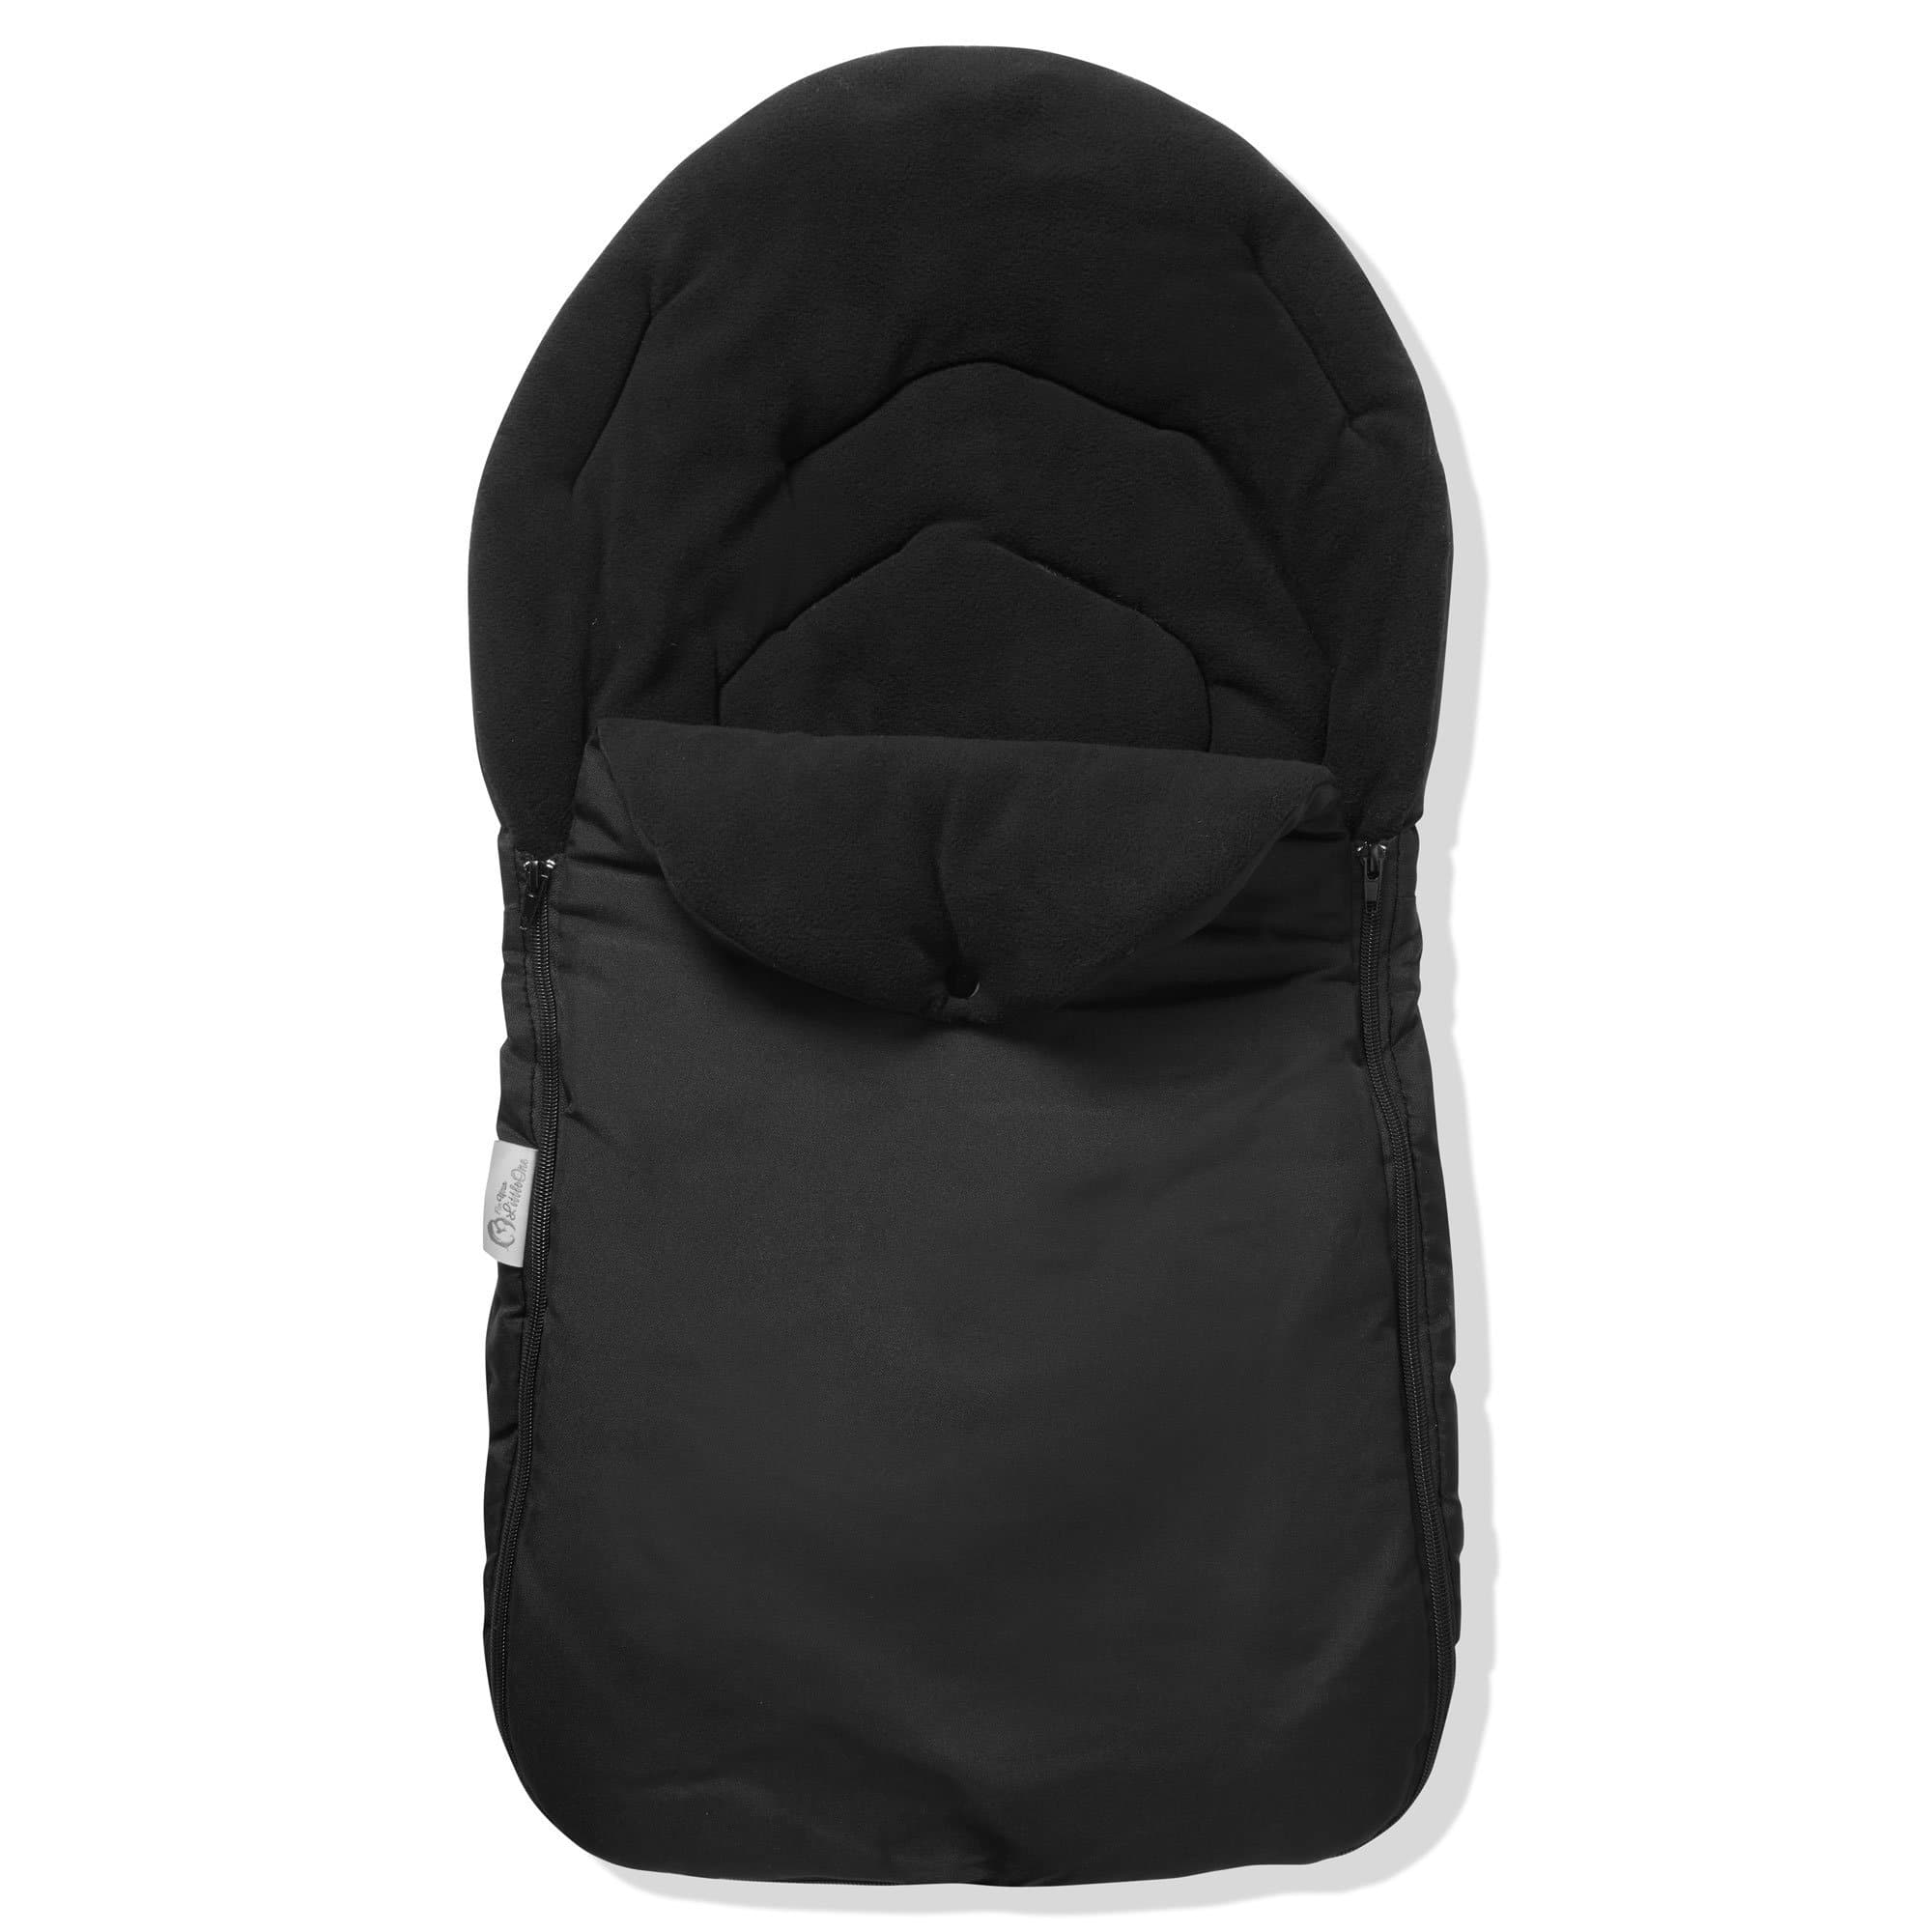 Car Seat Footmuff / Cosy Toes Compatible with Tutti Bambini - Black / Fits All Models | For Your Little One